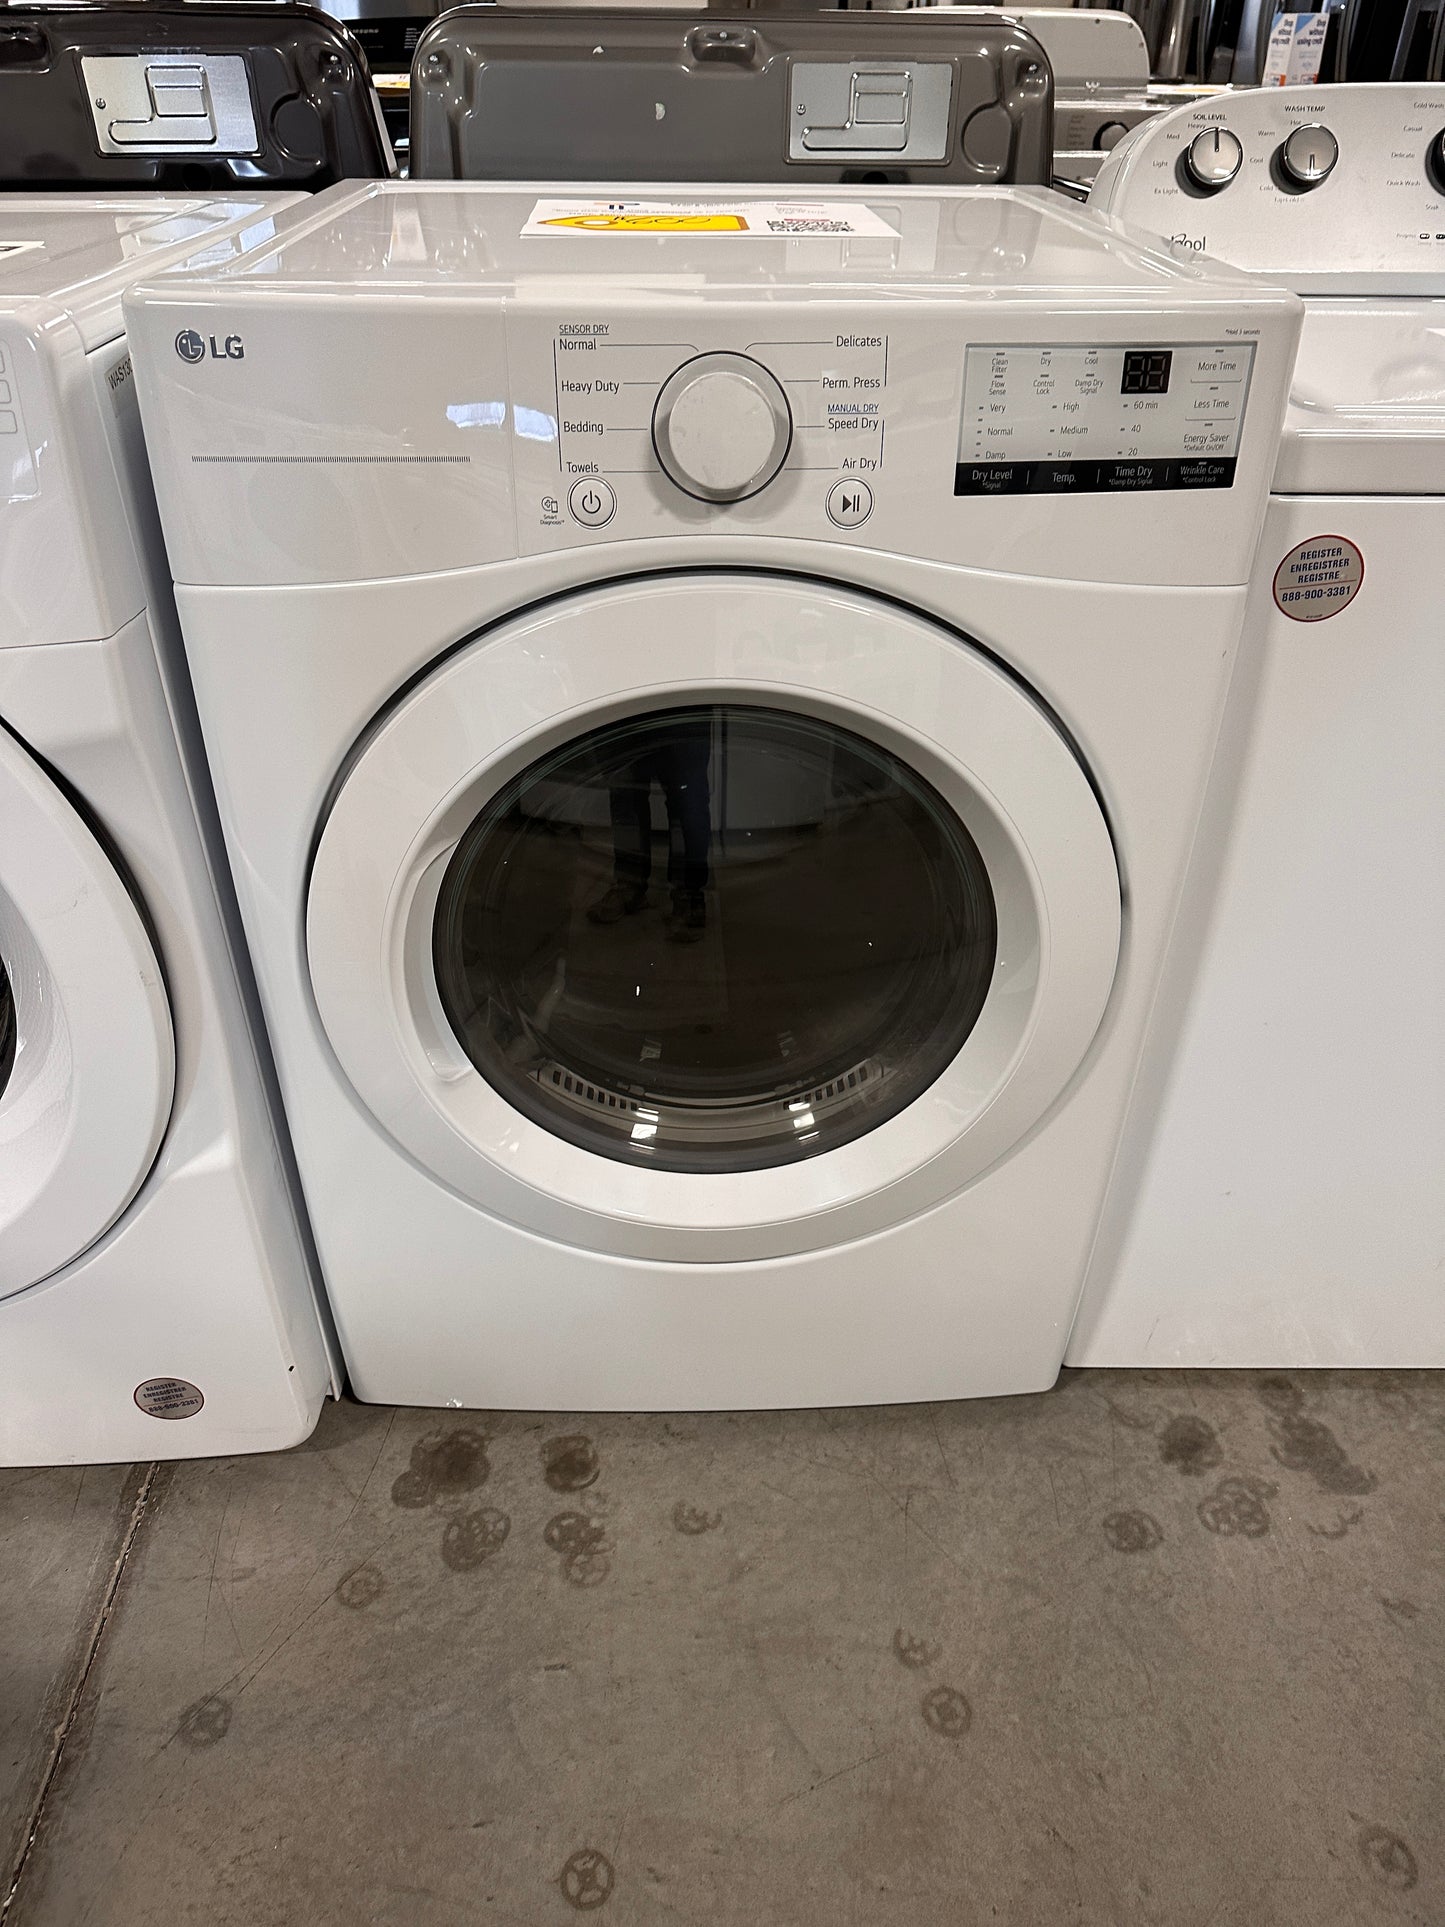 Stackable Electric Dryer with FlowSense - White  Model:DLE3400W  DRY12323